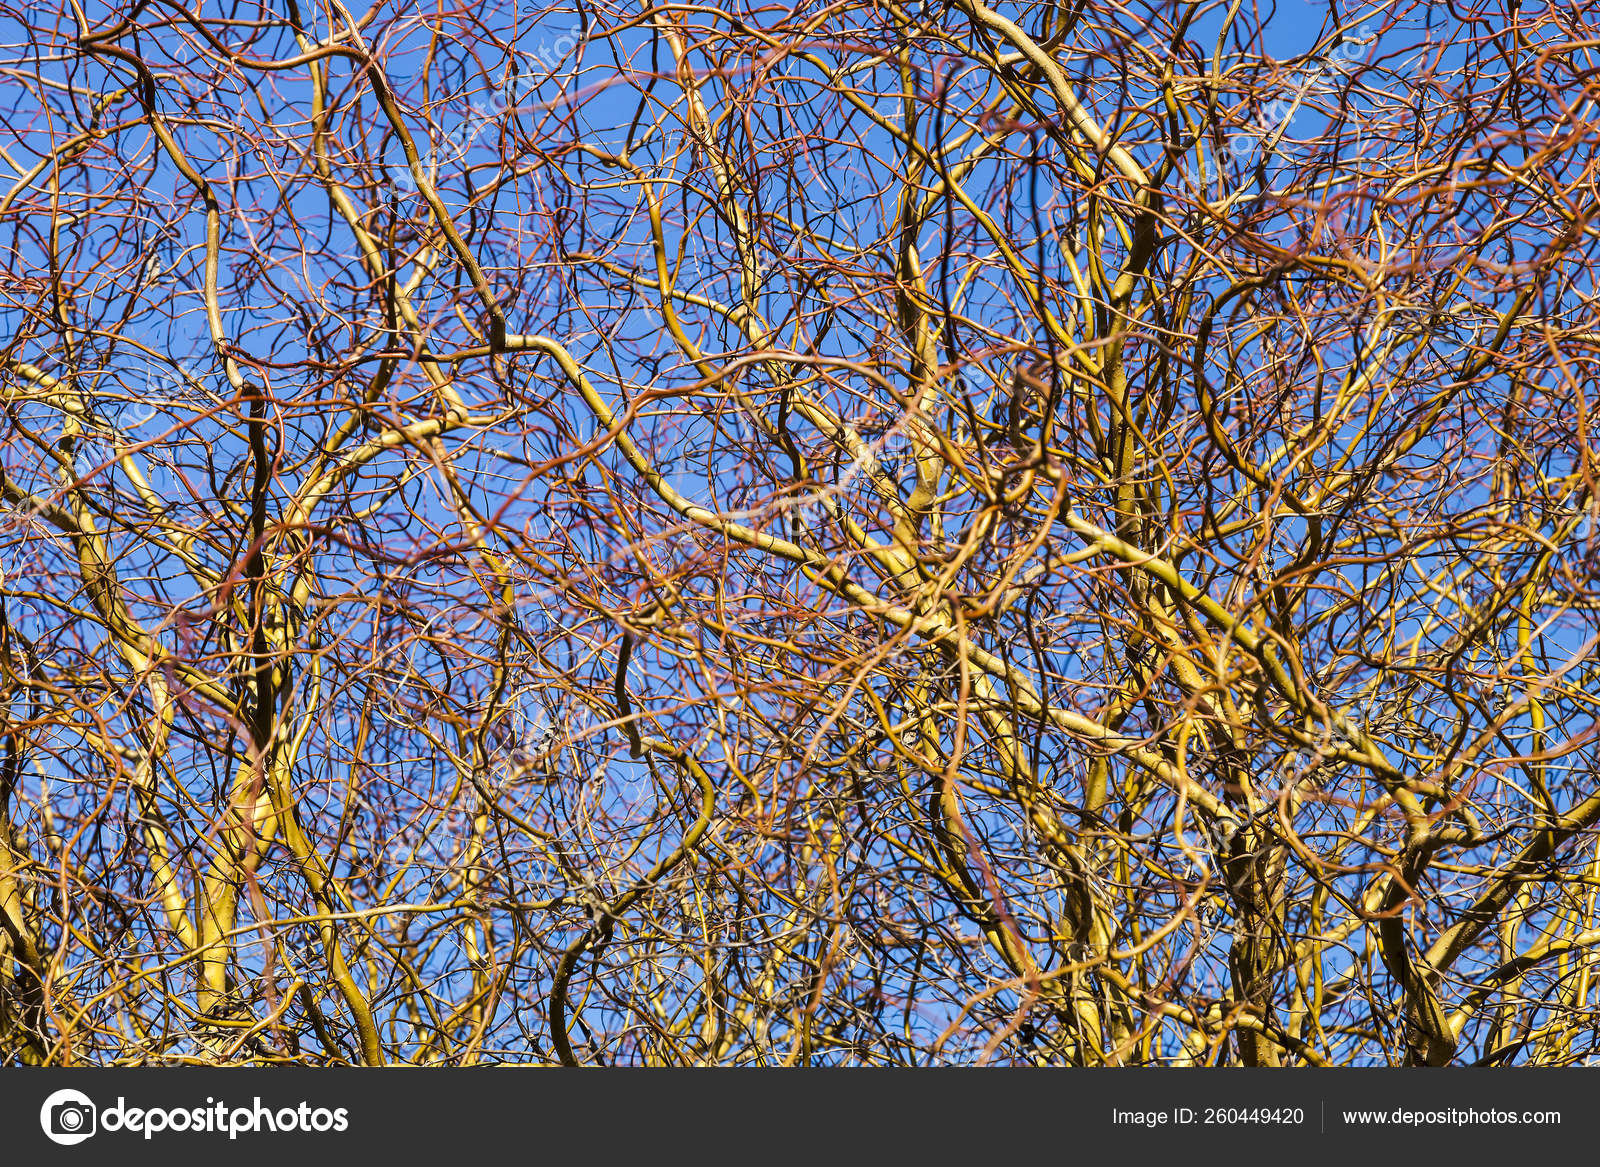 Texture Autumn Willow Branches Stock Editorial Photo C Yayimages